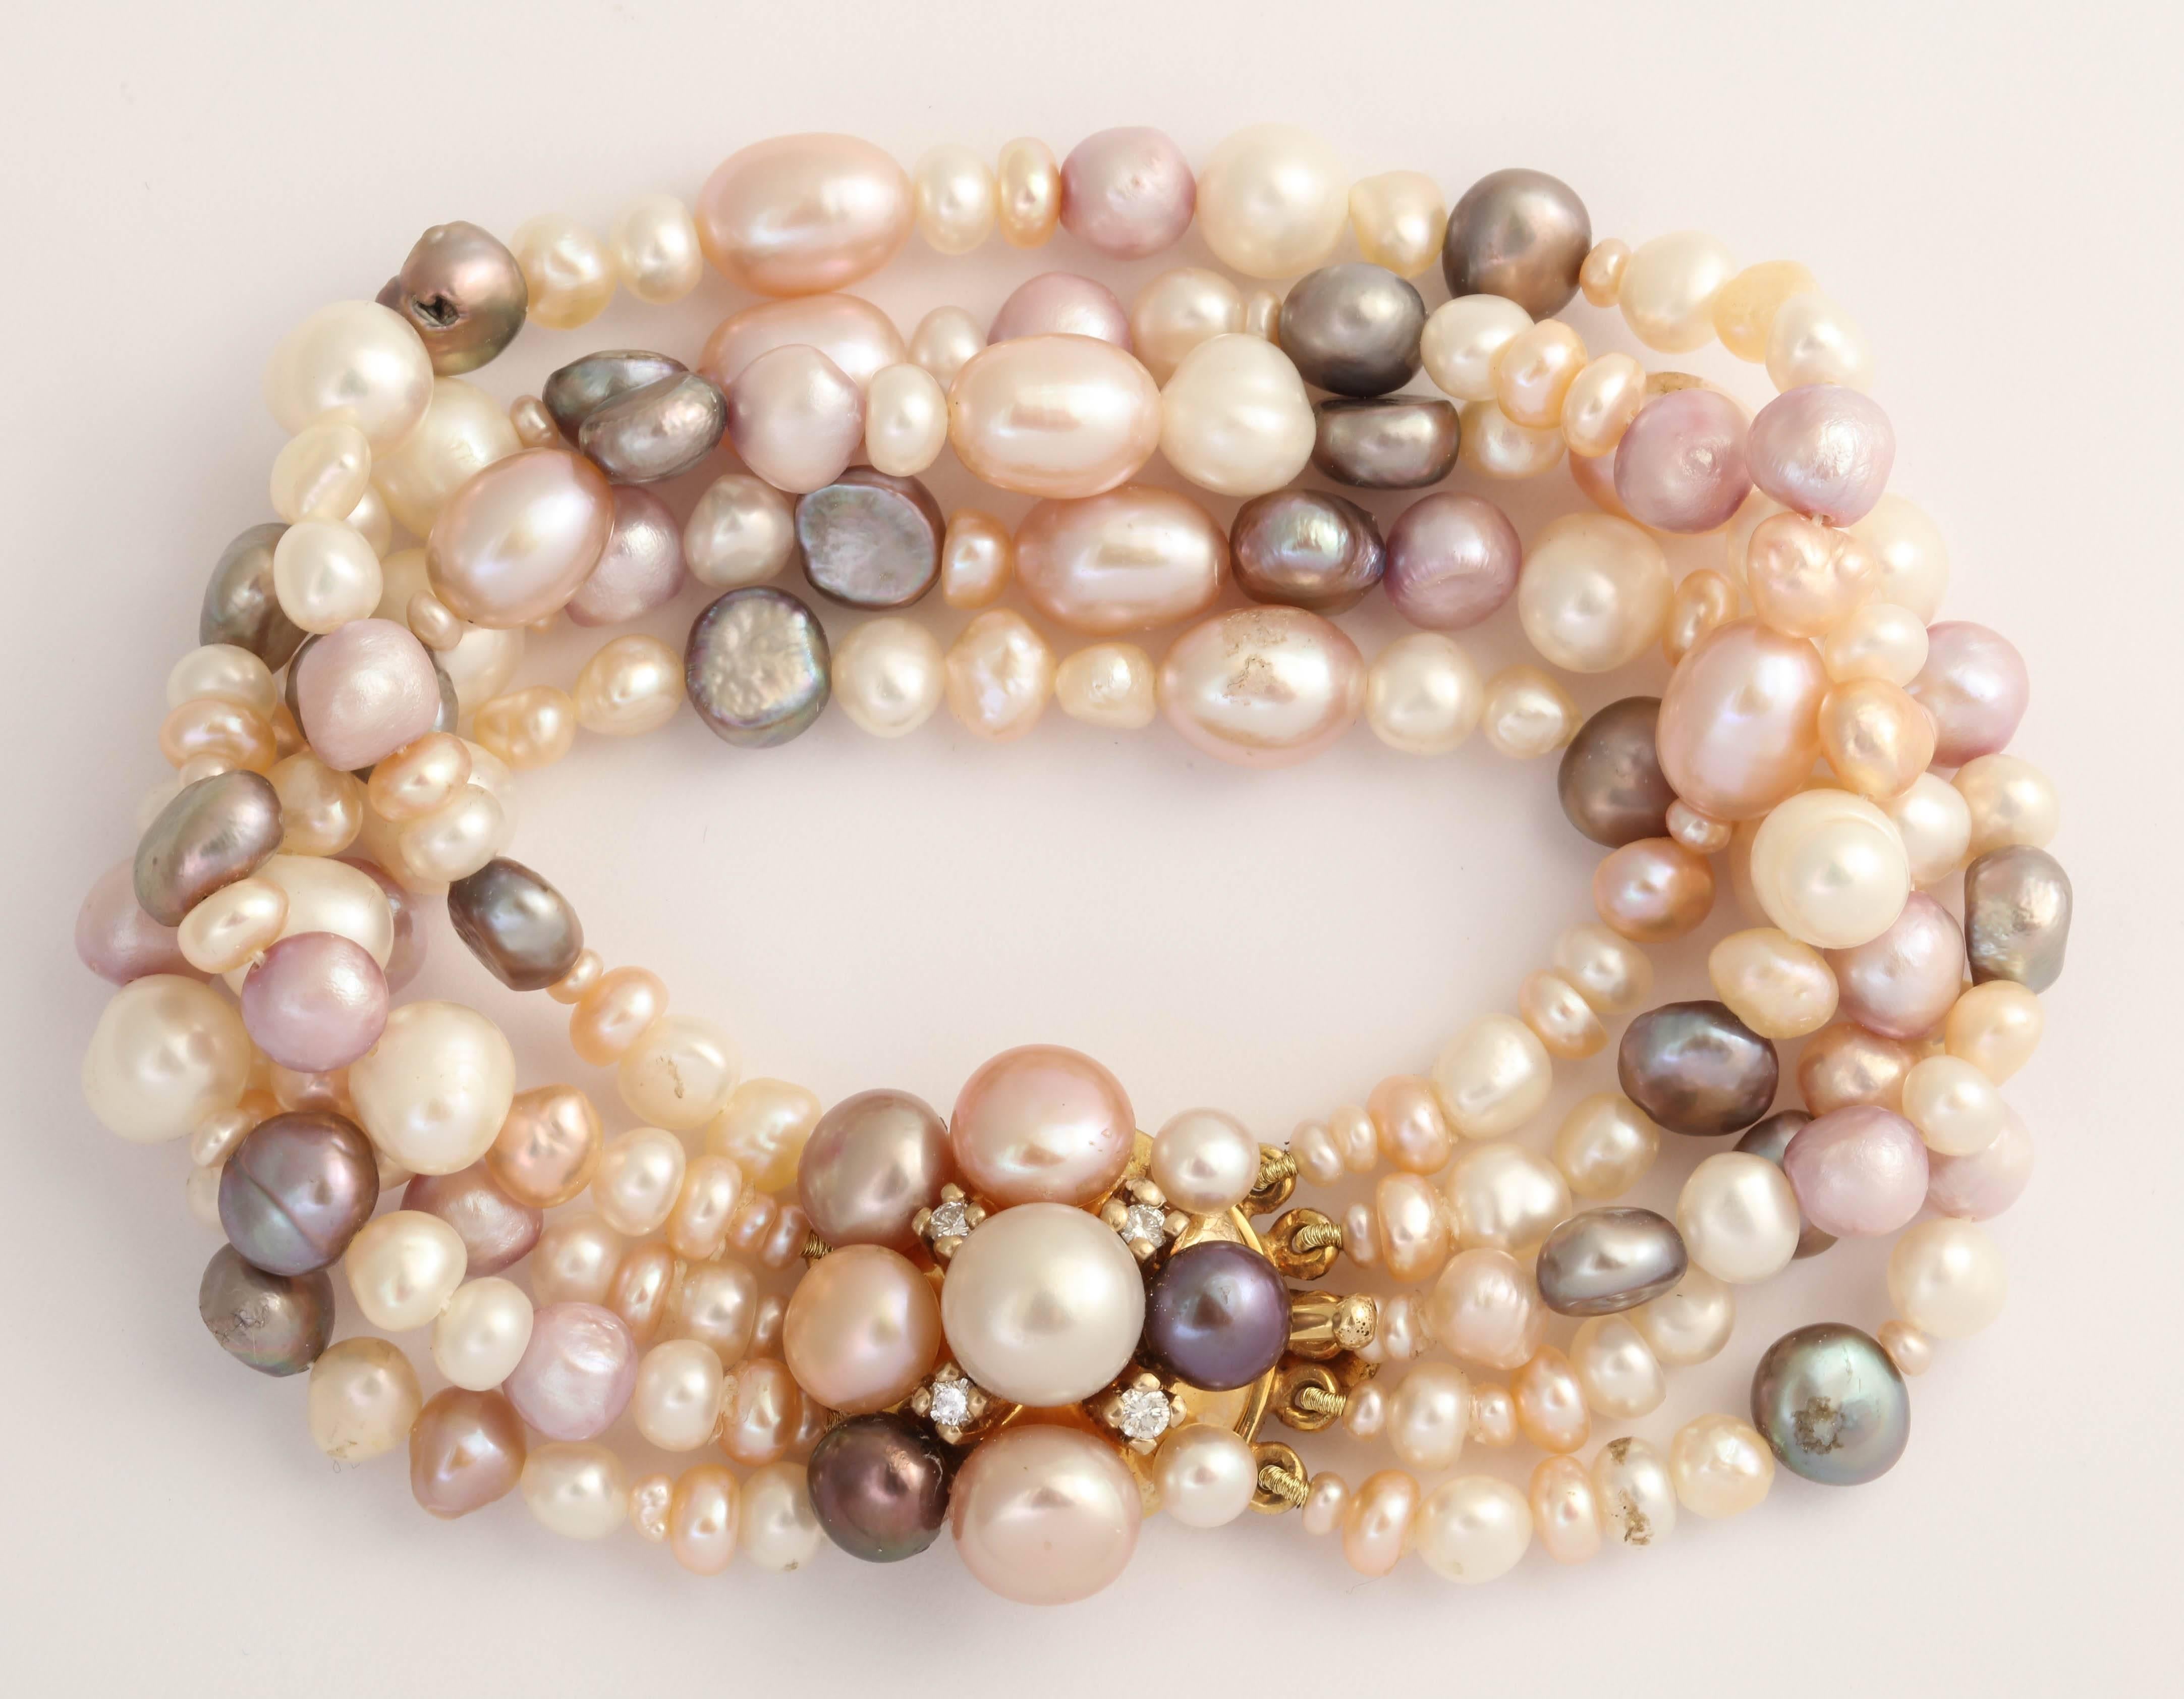 This delicious 5 strand combination of pink, peach, lilac, white and gray fresh water pearls compliments any skin tone. The clasp is a stunning circle of half drilled pearls that match the bracelet pearls and diamonds set in 14 Kt gold A necklace